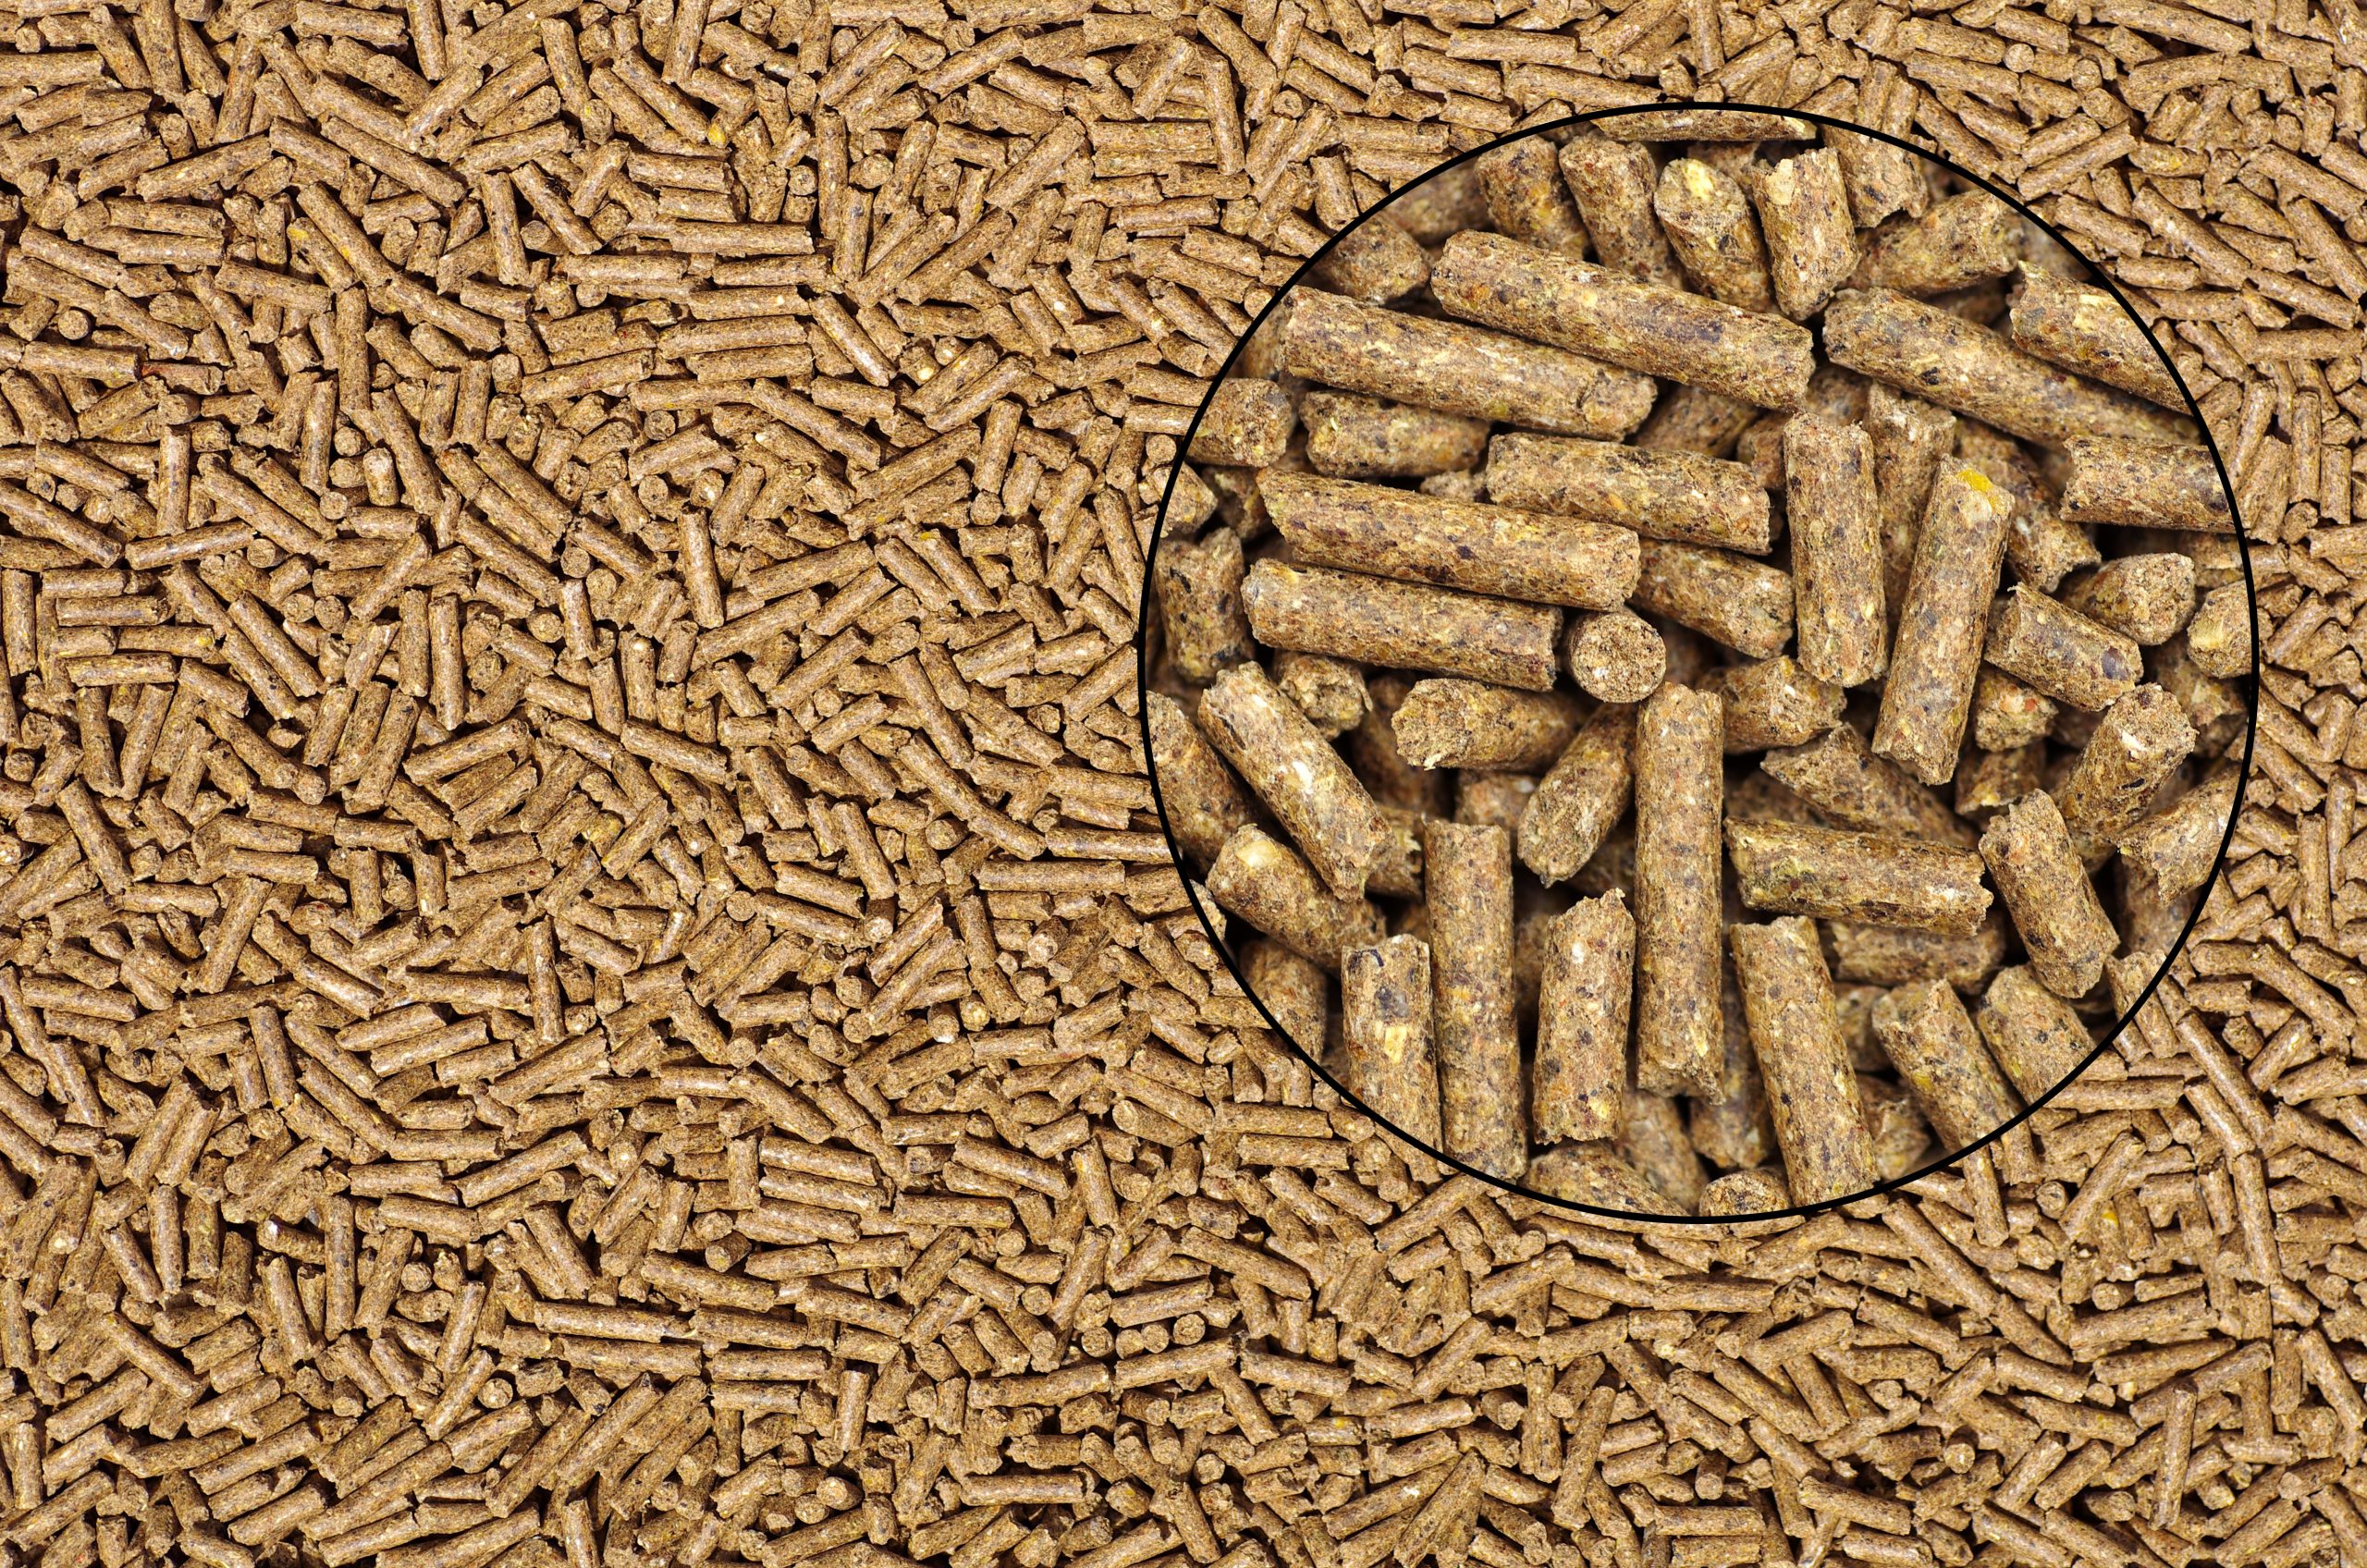 What to consider in feed processing. Photo: Shutterstock